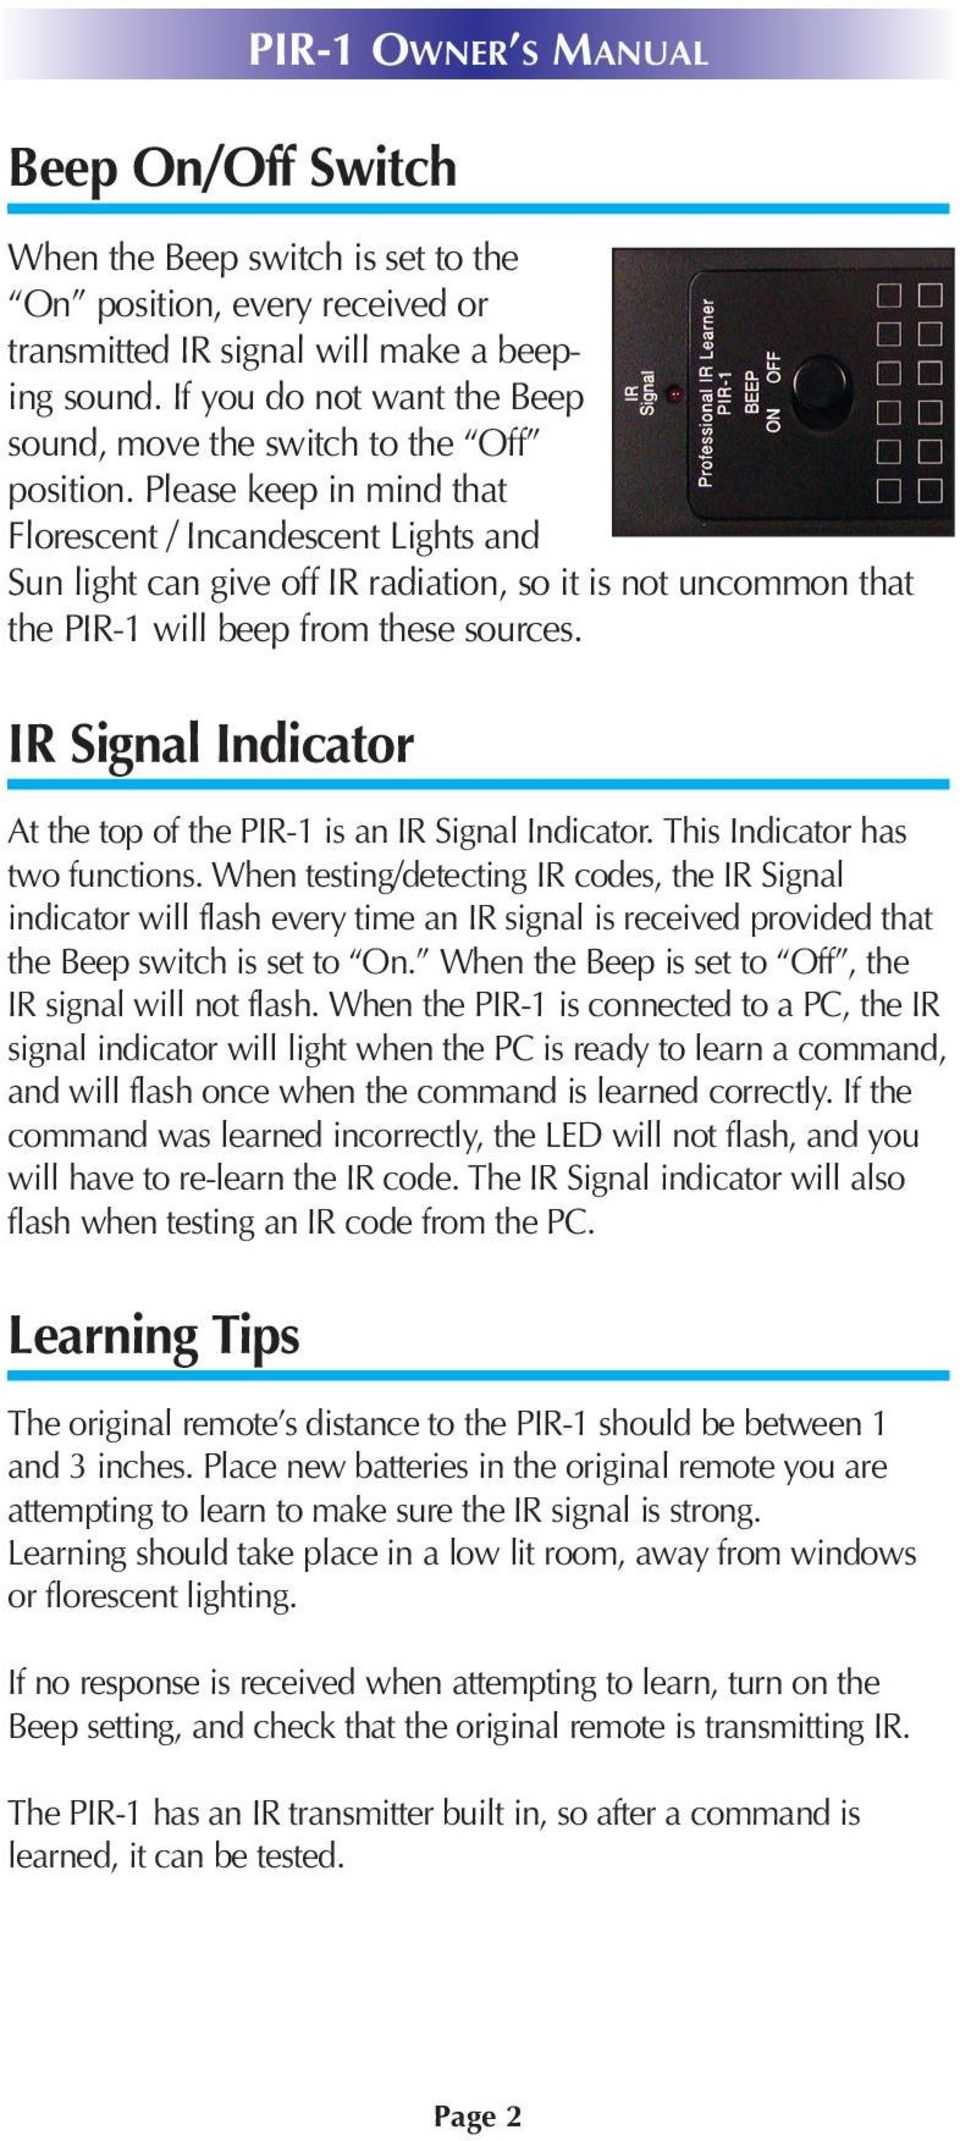 Please keep in mind that Florescent / Incandescent Lights and Sun light can give off IR radiation, so it is not uncommon that the PIR-1 will beep from these sources.